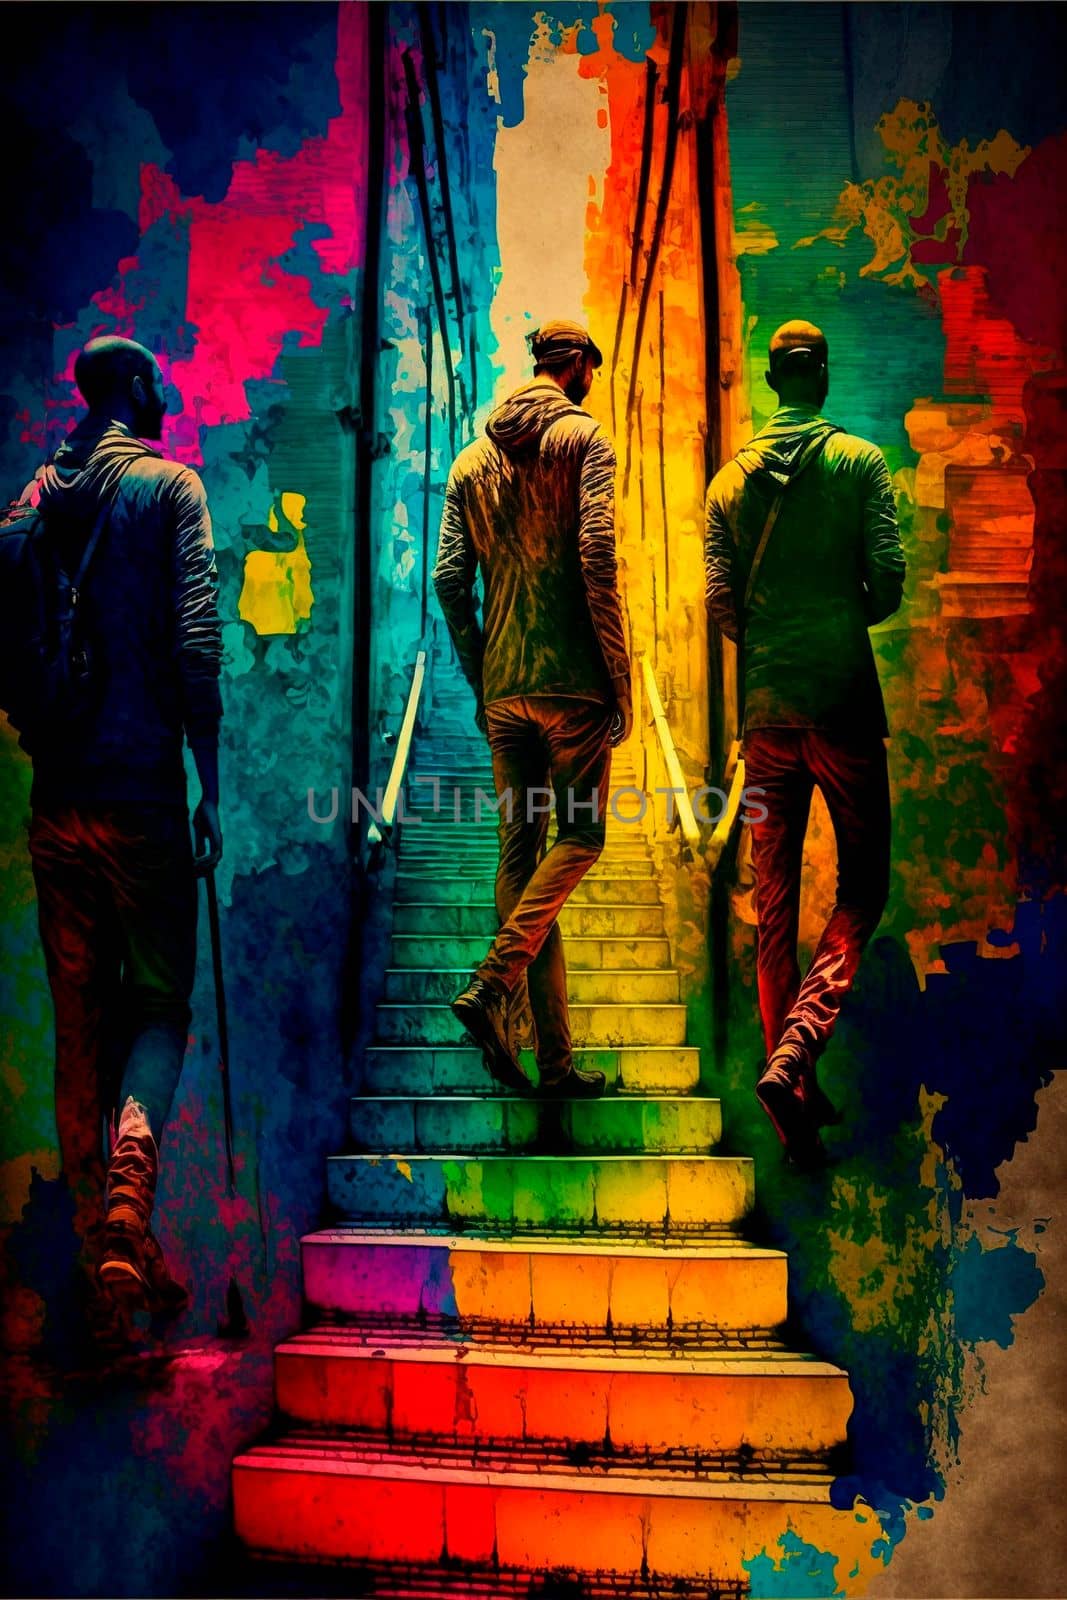 gangster and his friends Climbing stairs, psychedelic colors, finding yourself by NeuroSky